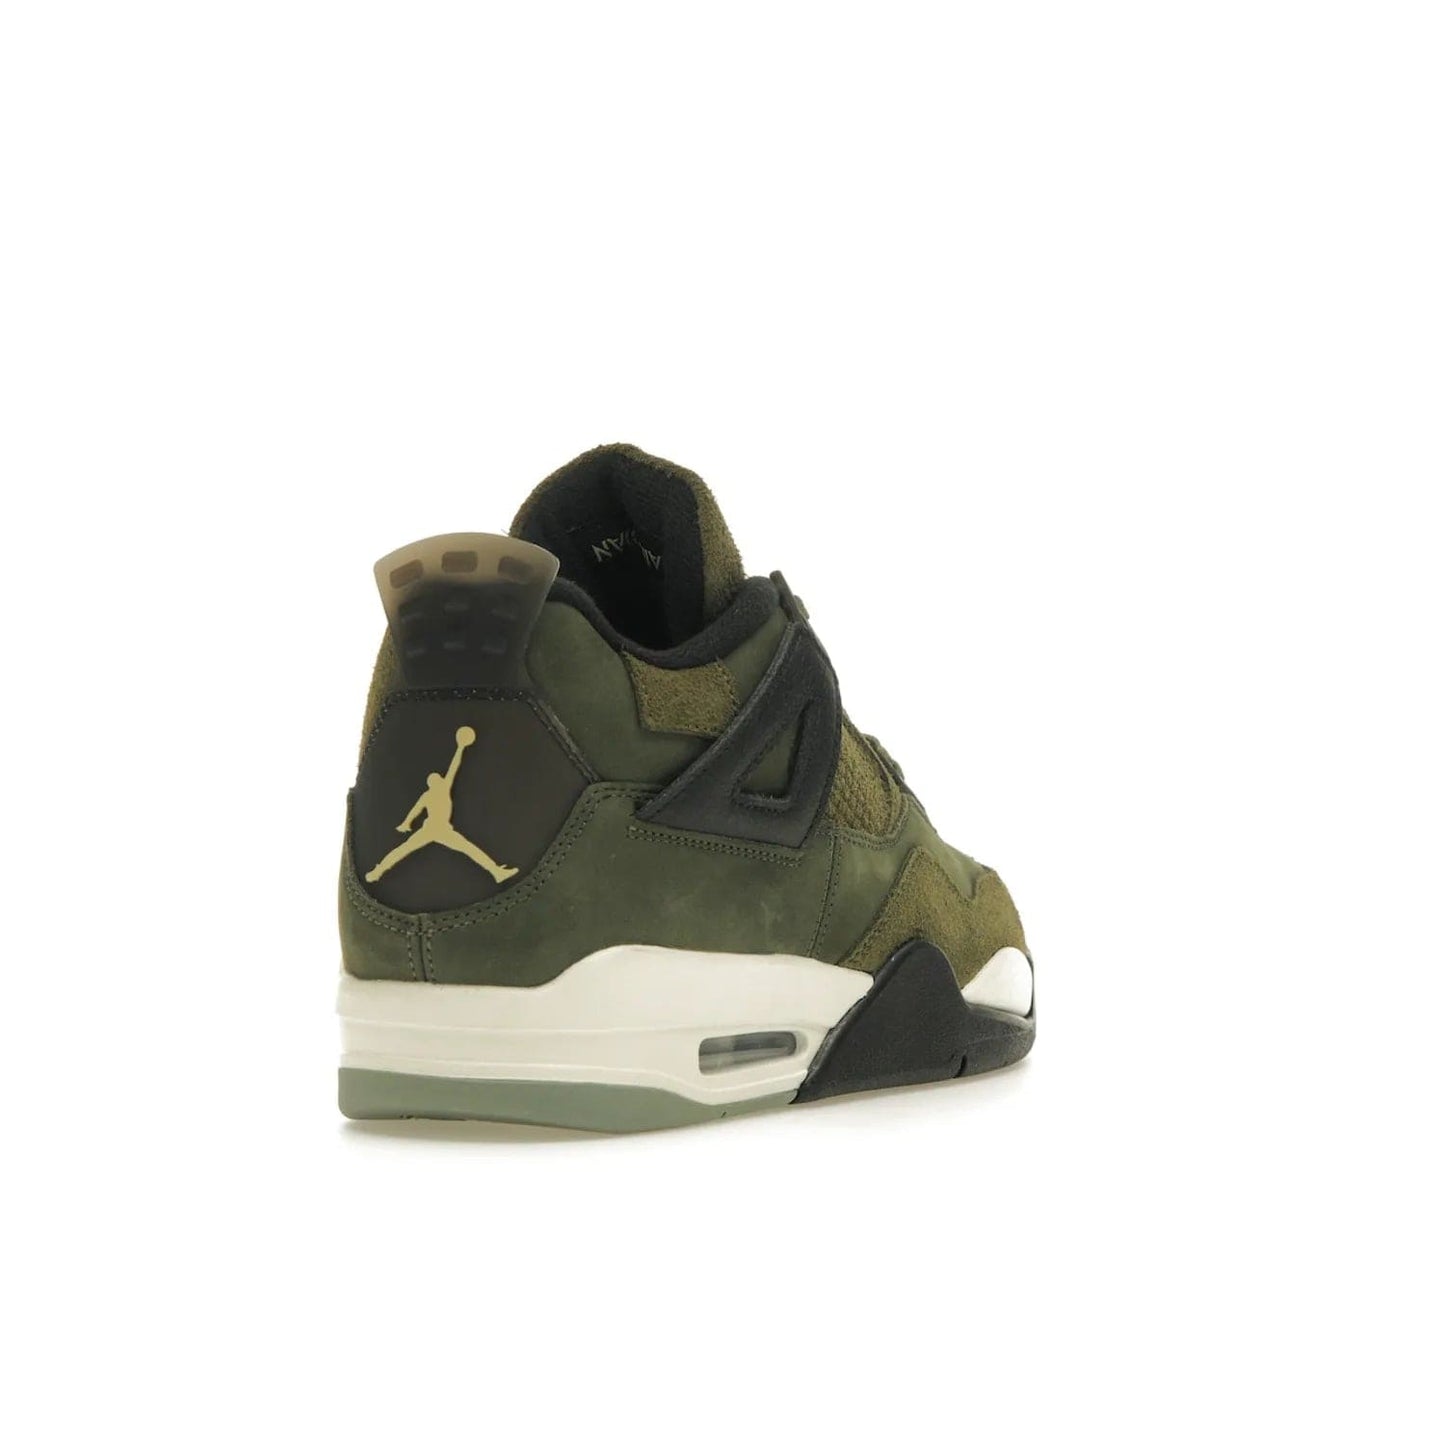 Jordan 4 Retro SE Craft Medium Olive - Image 31 - Only at www.BallersClubKickz.com - Grab the Jordan 4 Retro SE Crafts for a unique style. Combines Medium Olive, Pale Vanilla, Khaki, Black and Sail, with same classic shape, cushioning, and rubber outsole. Available on November 18th!